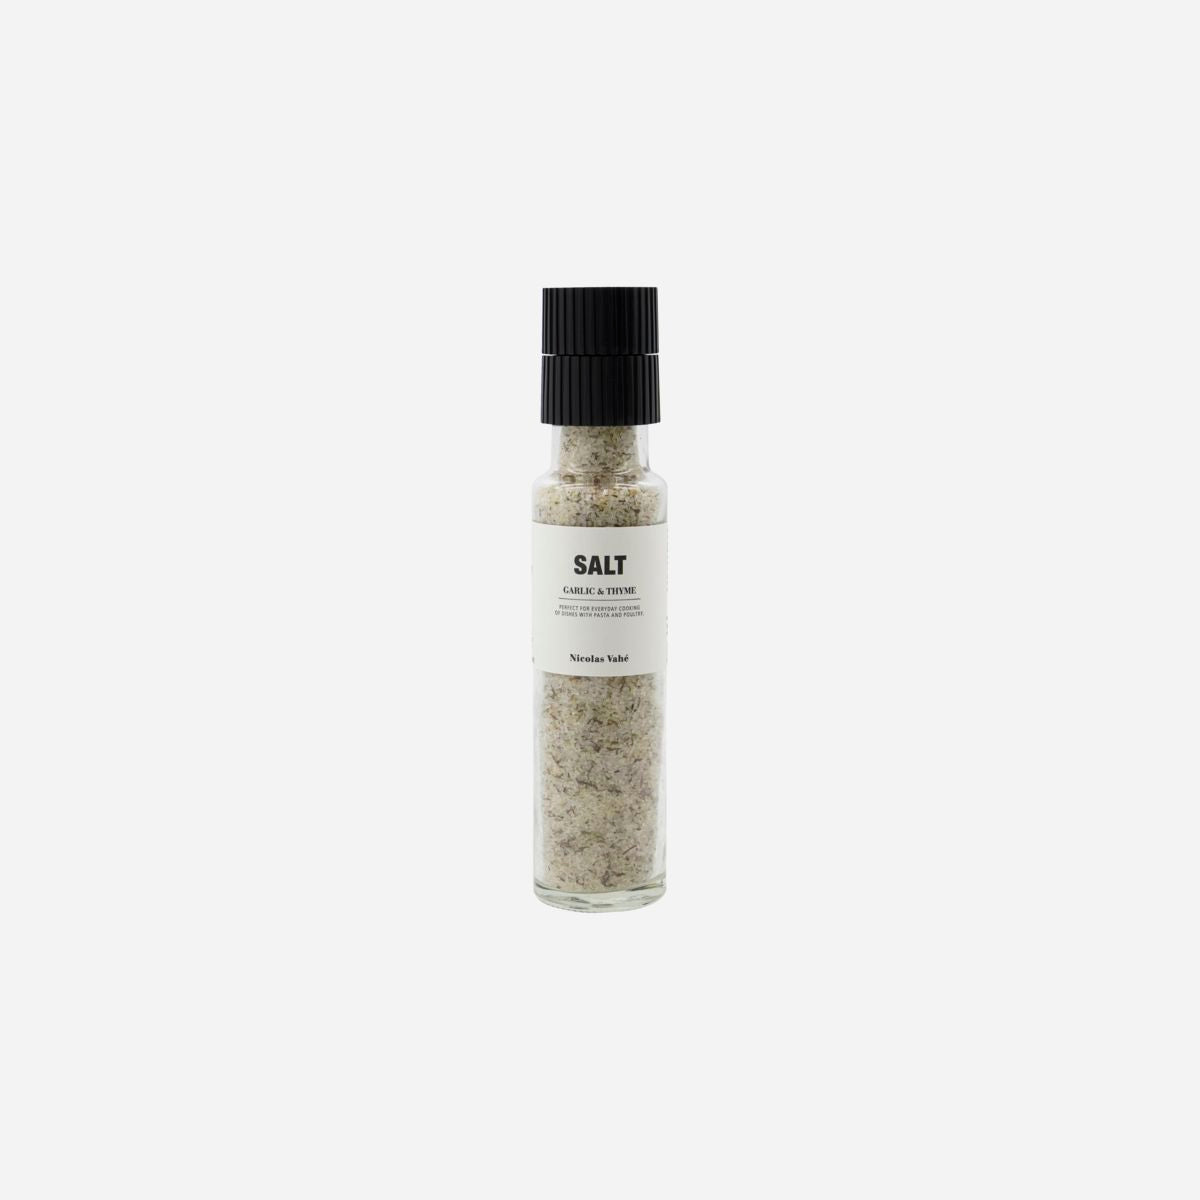 Salt with Garlic and Thyme